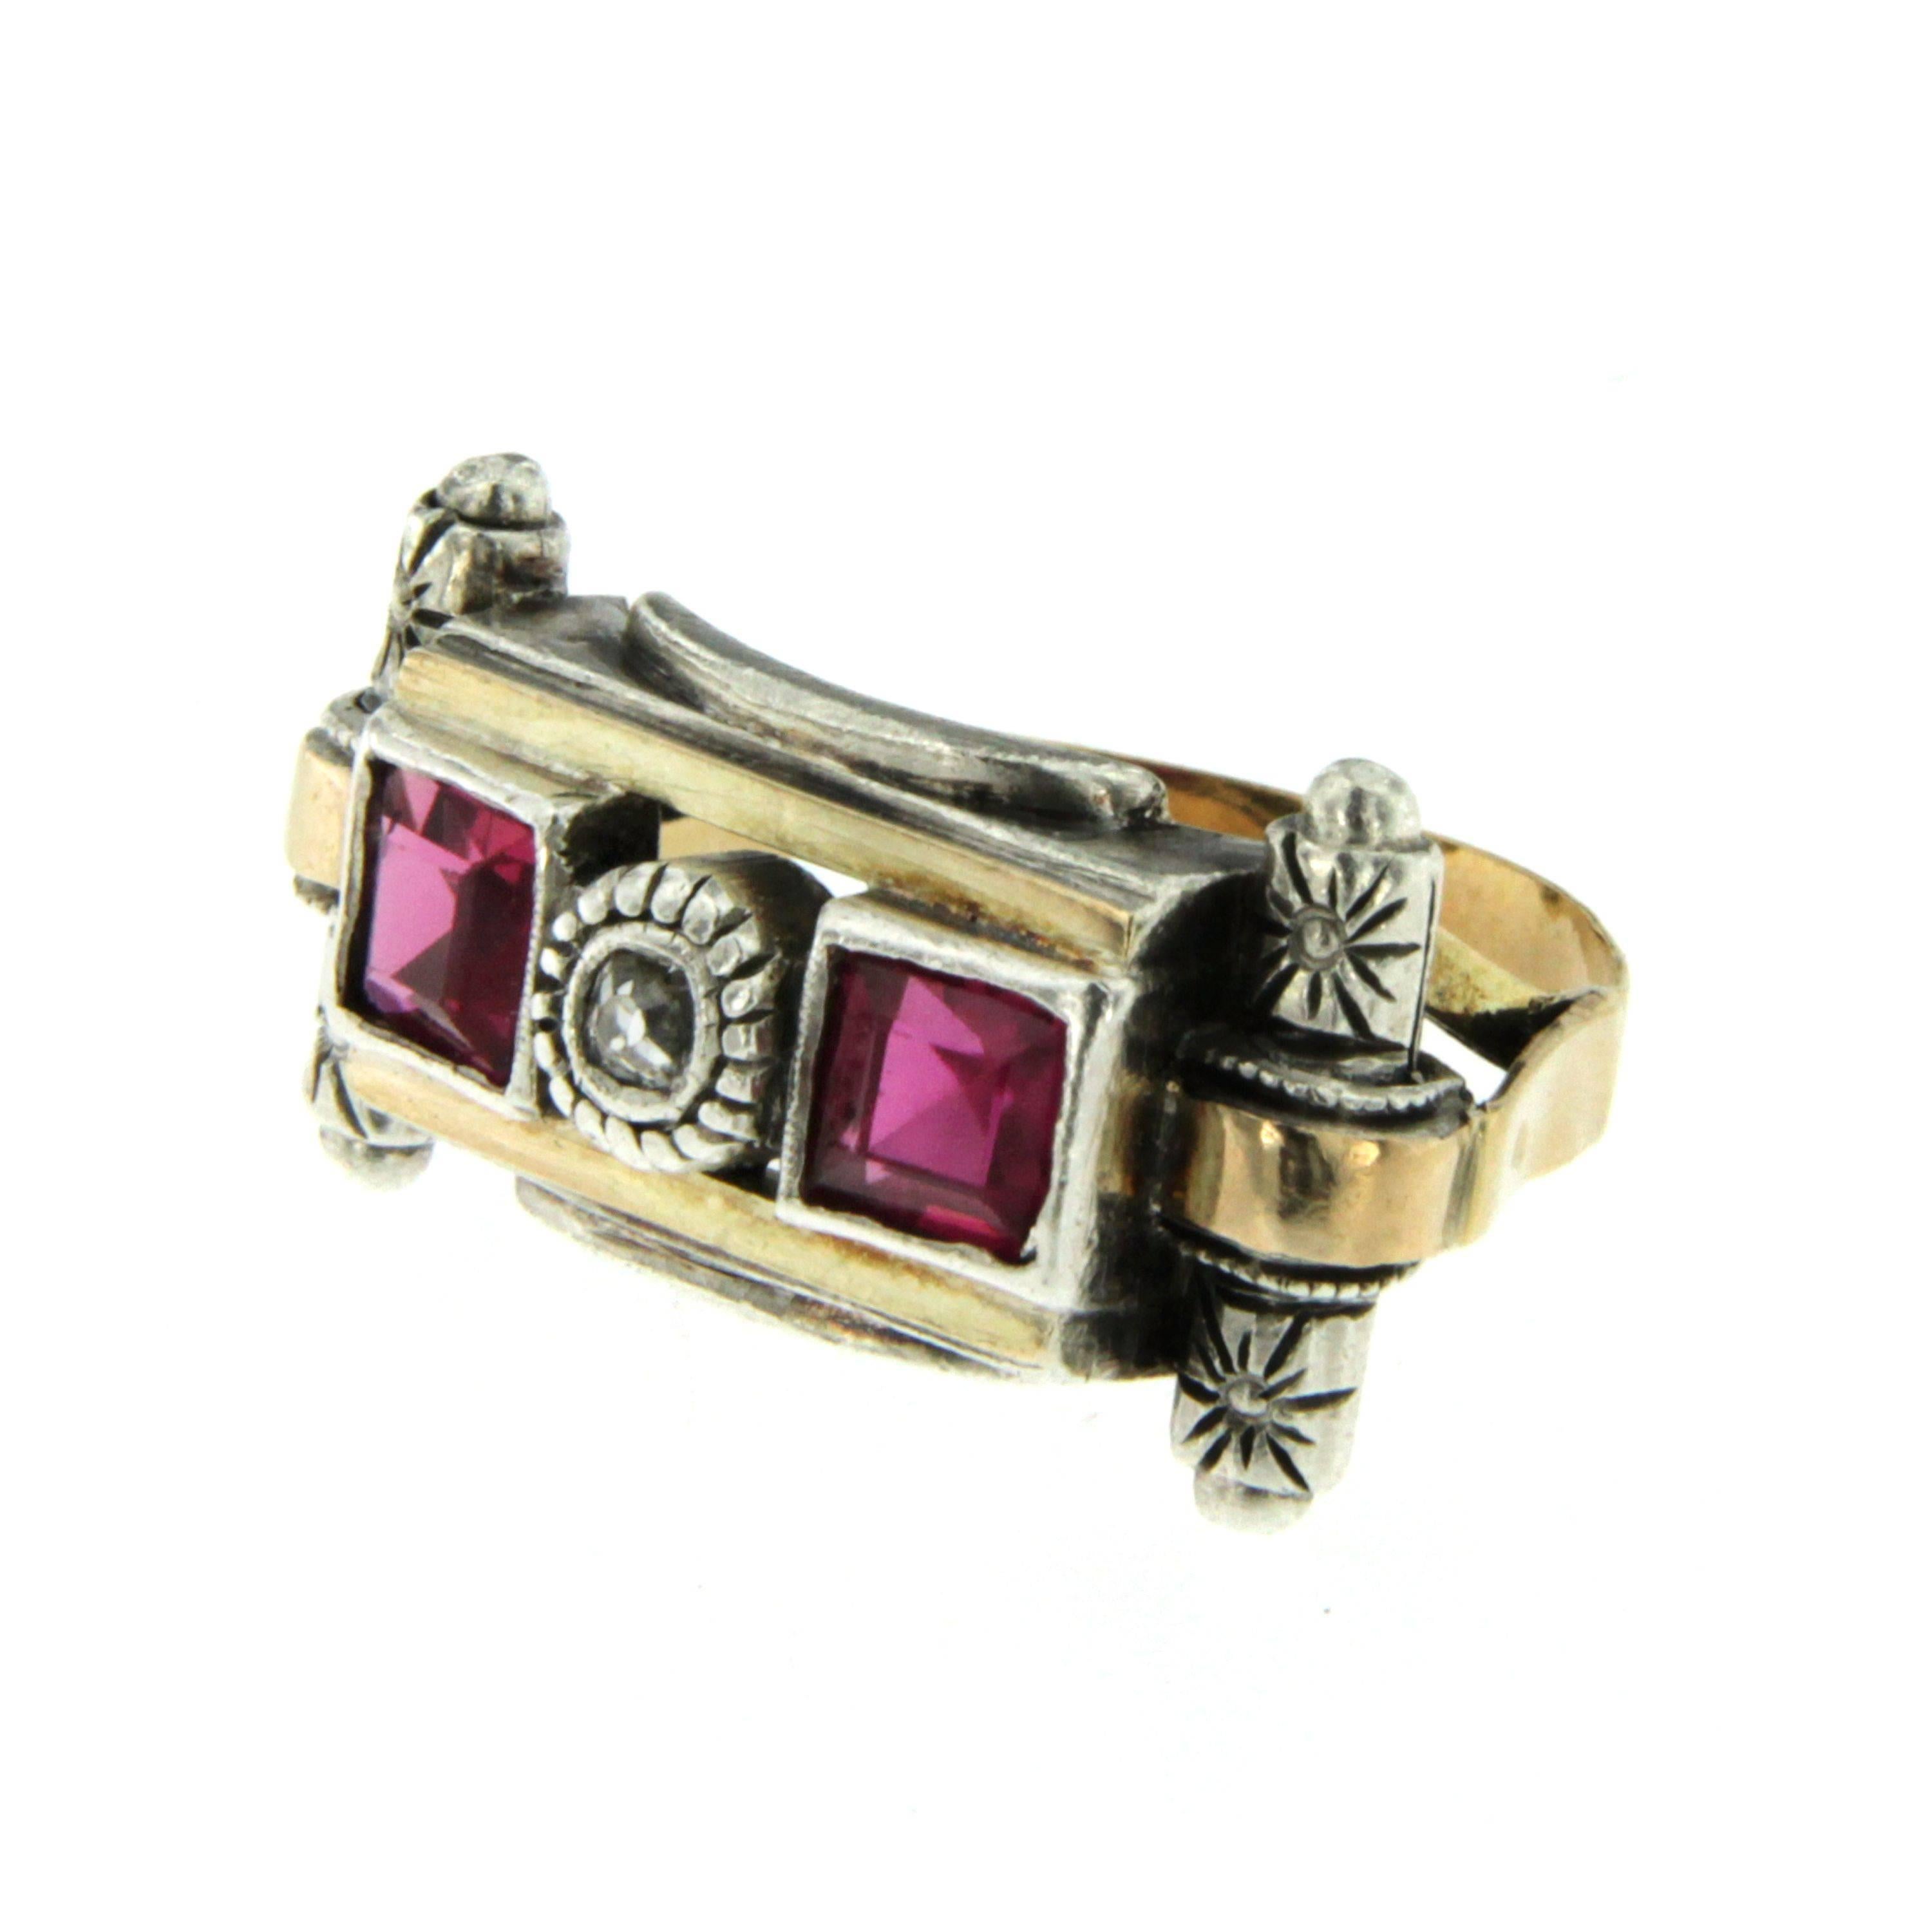 An Unusual Art Deco piece from 1930s set with one European cut Diamond in the center and two semiprecious stone square cut in the sides all mounted in a handcrafted 14K gold and silver mounting.   

Ring Size: US 6,5 - IT 13 - FR 53 - UK N  This